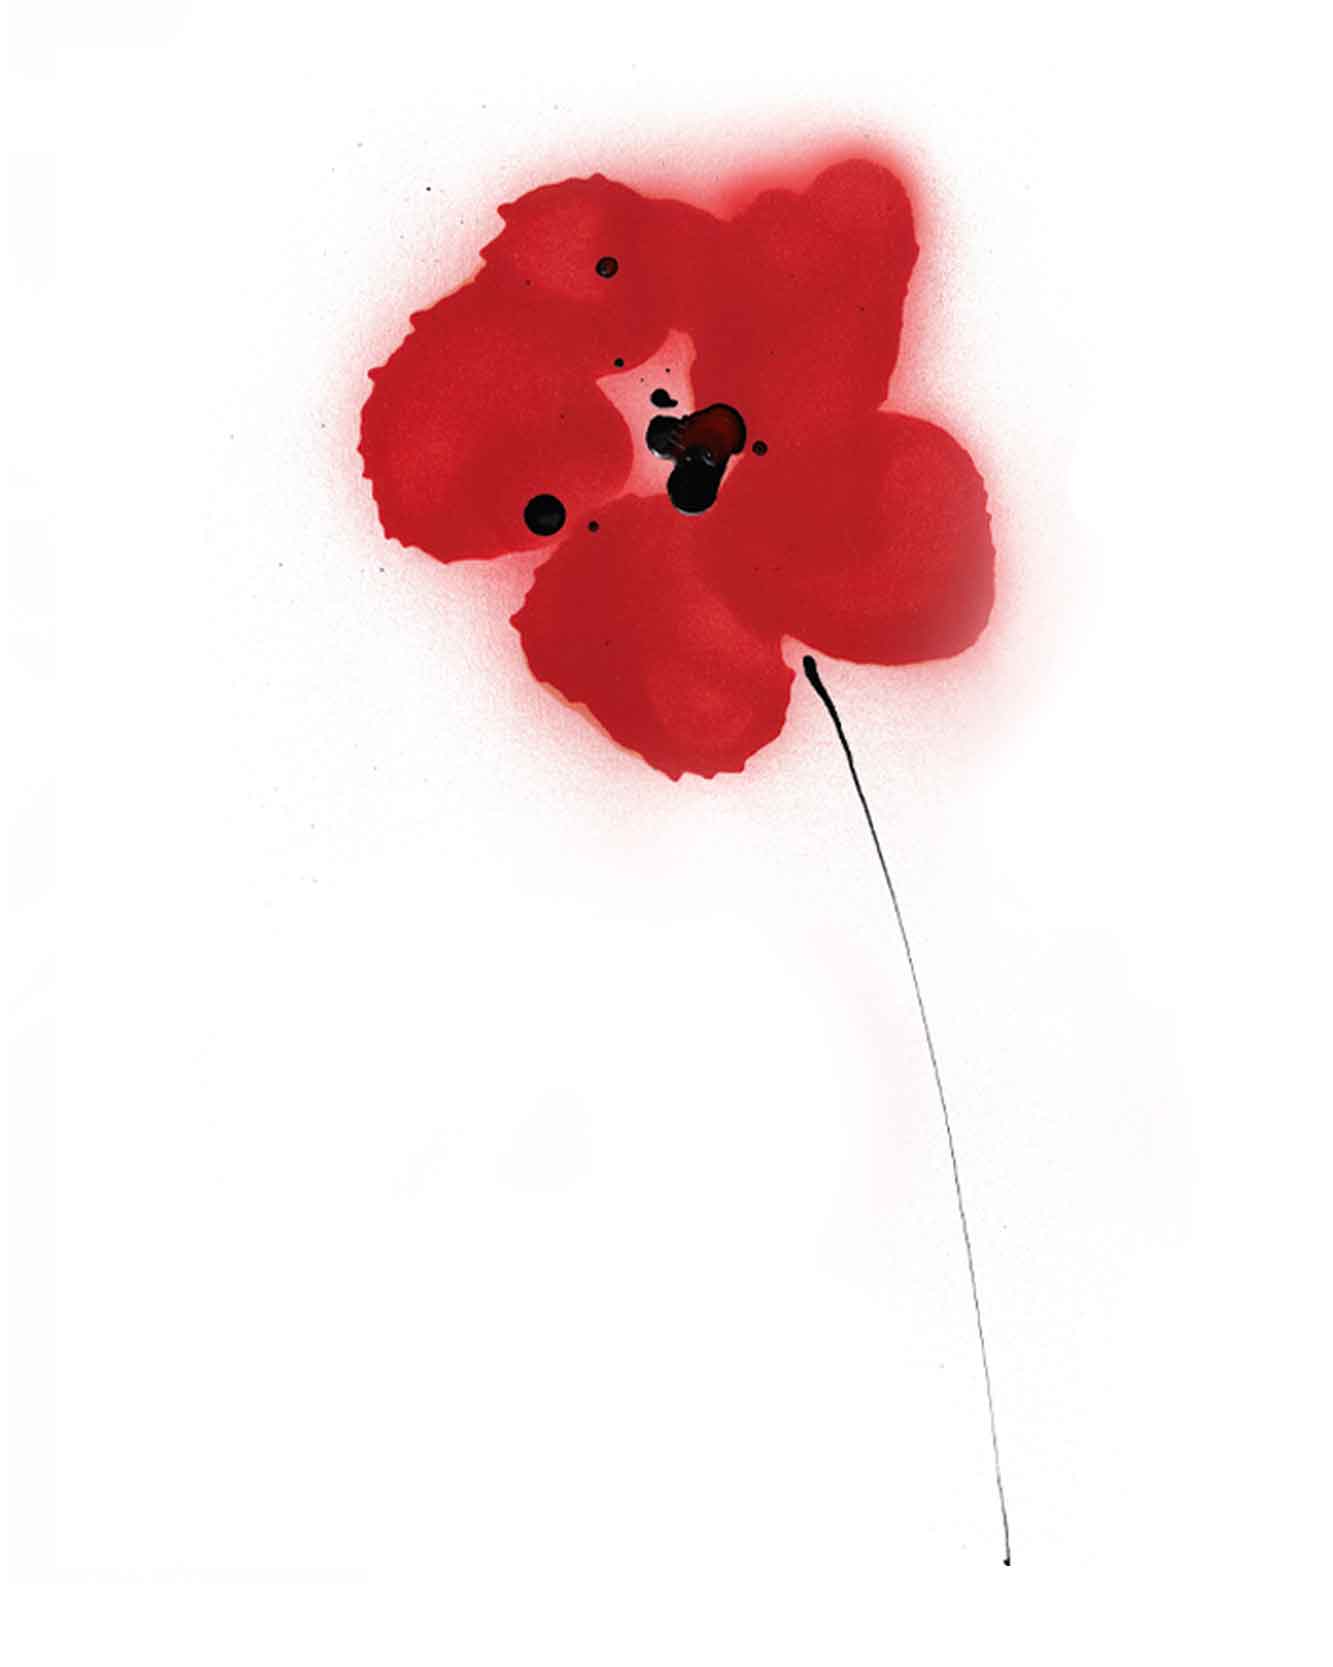 Single red poppy illustration. The flower is drawn in ink and spray paint, for Remembrance Day.